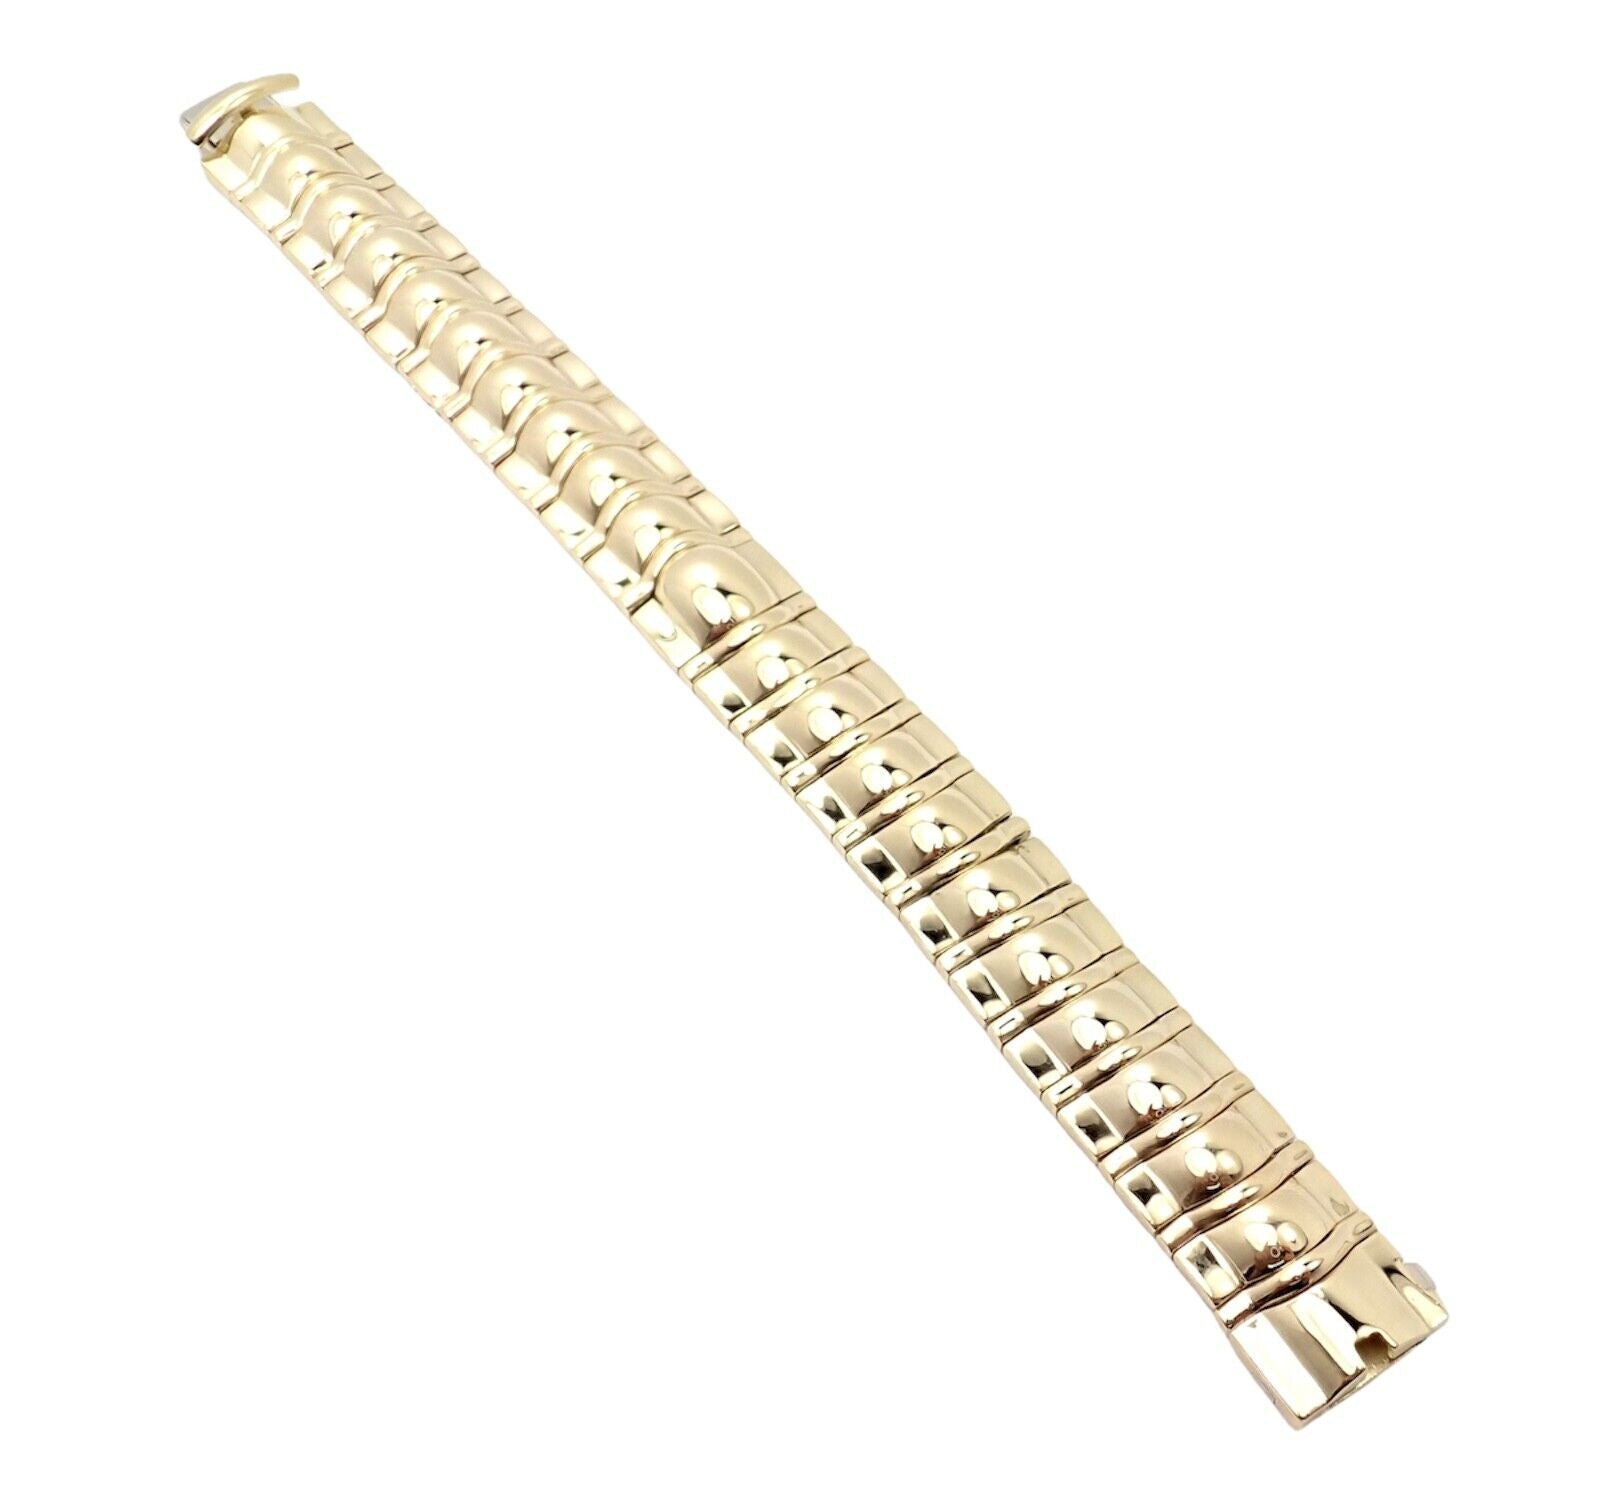 Piaget Jewelry & Watches:Fine Jewelry:Bracelets & Charms Authentic! Piaget 18k Yellow Gold Classic Thick Limited Edition 1990 Bracelet